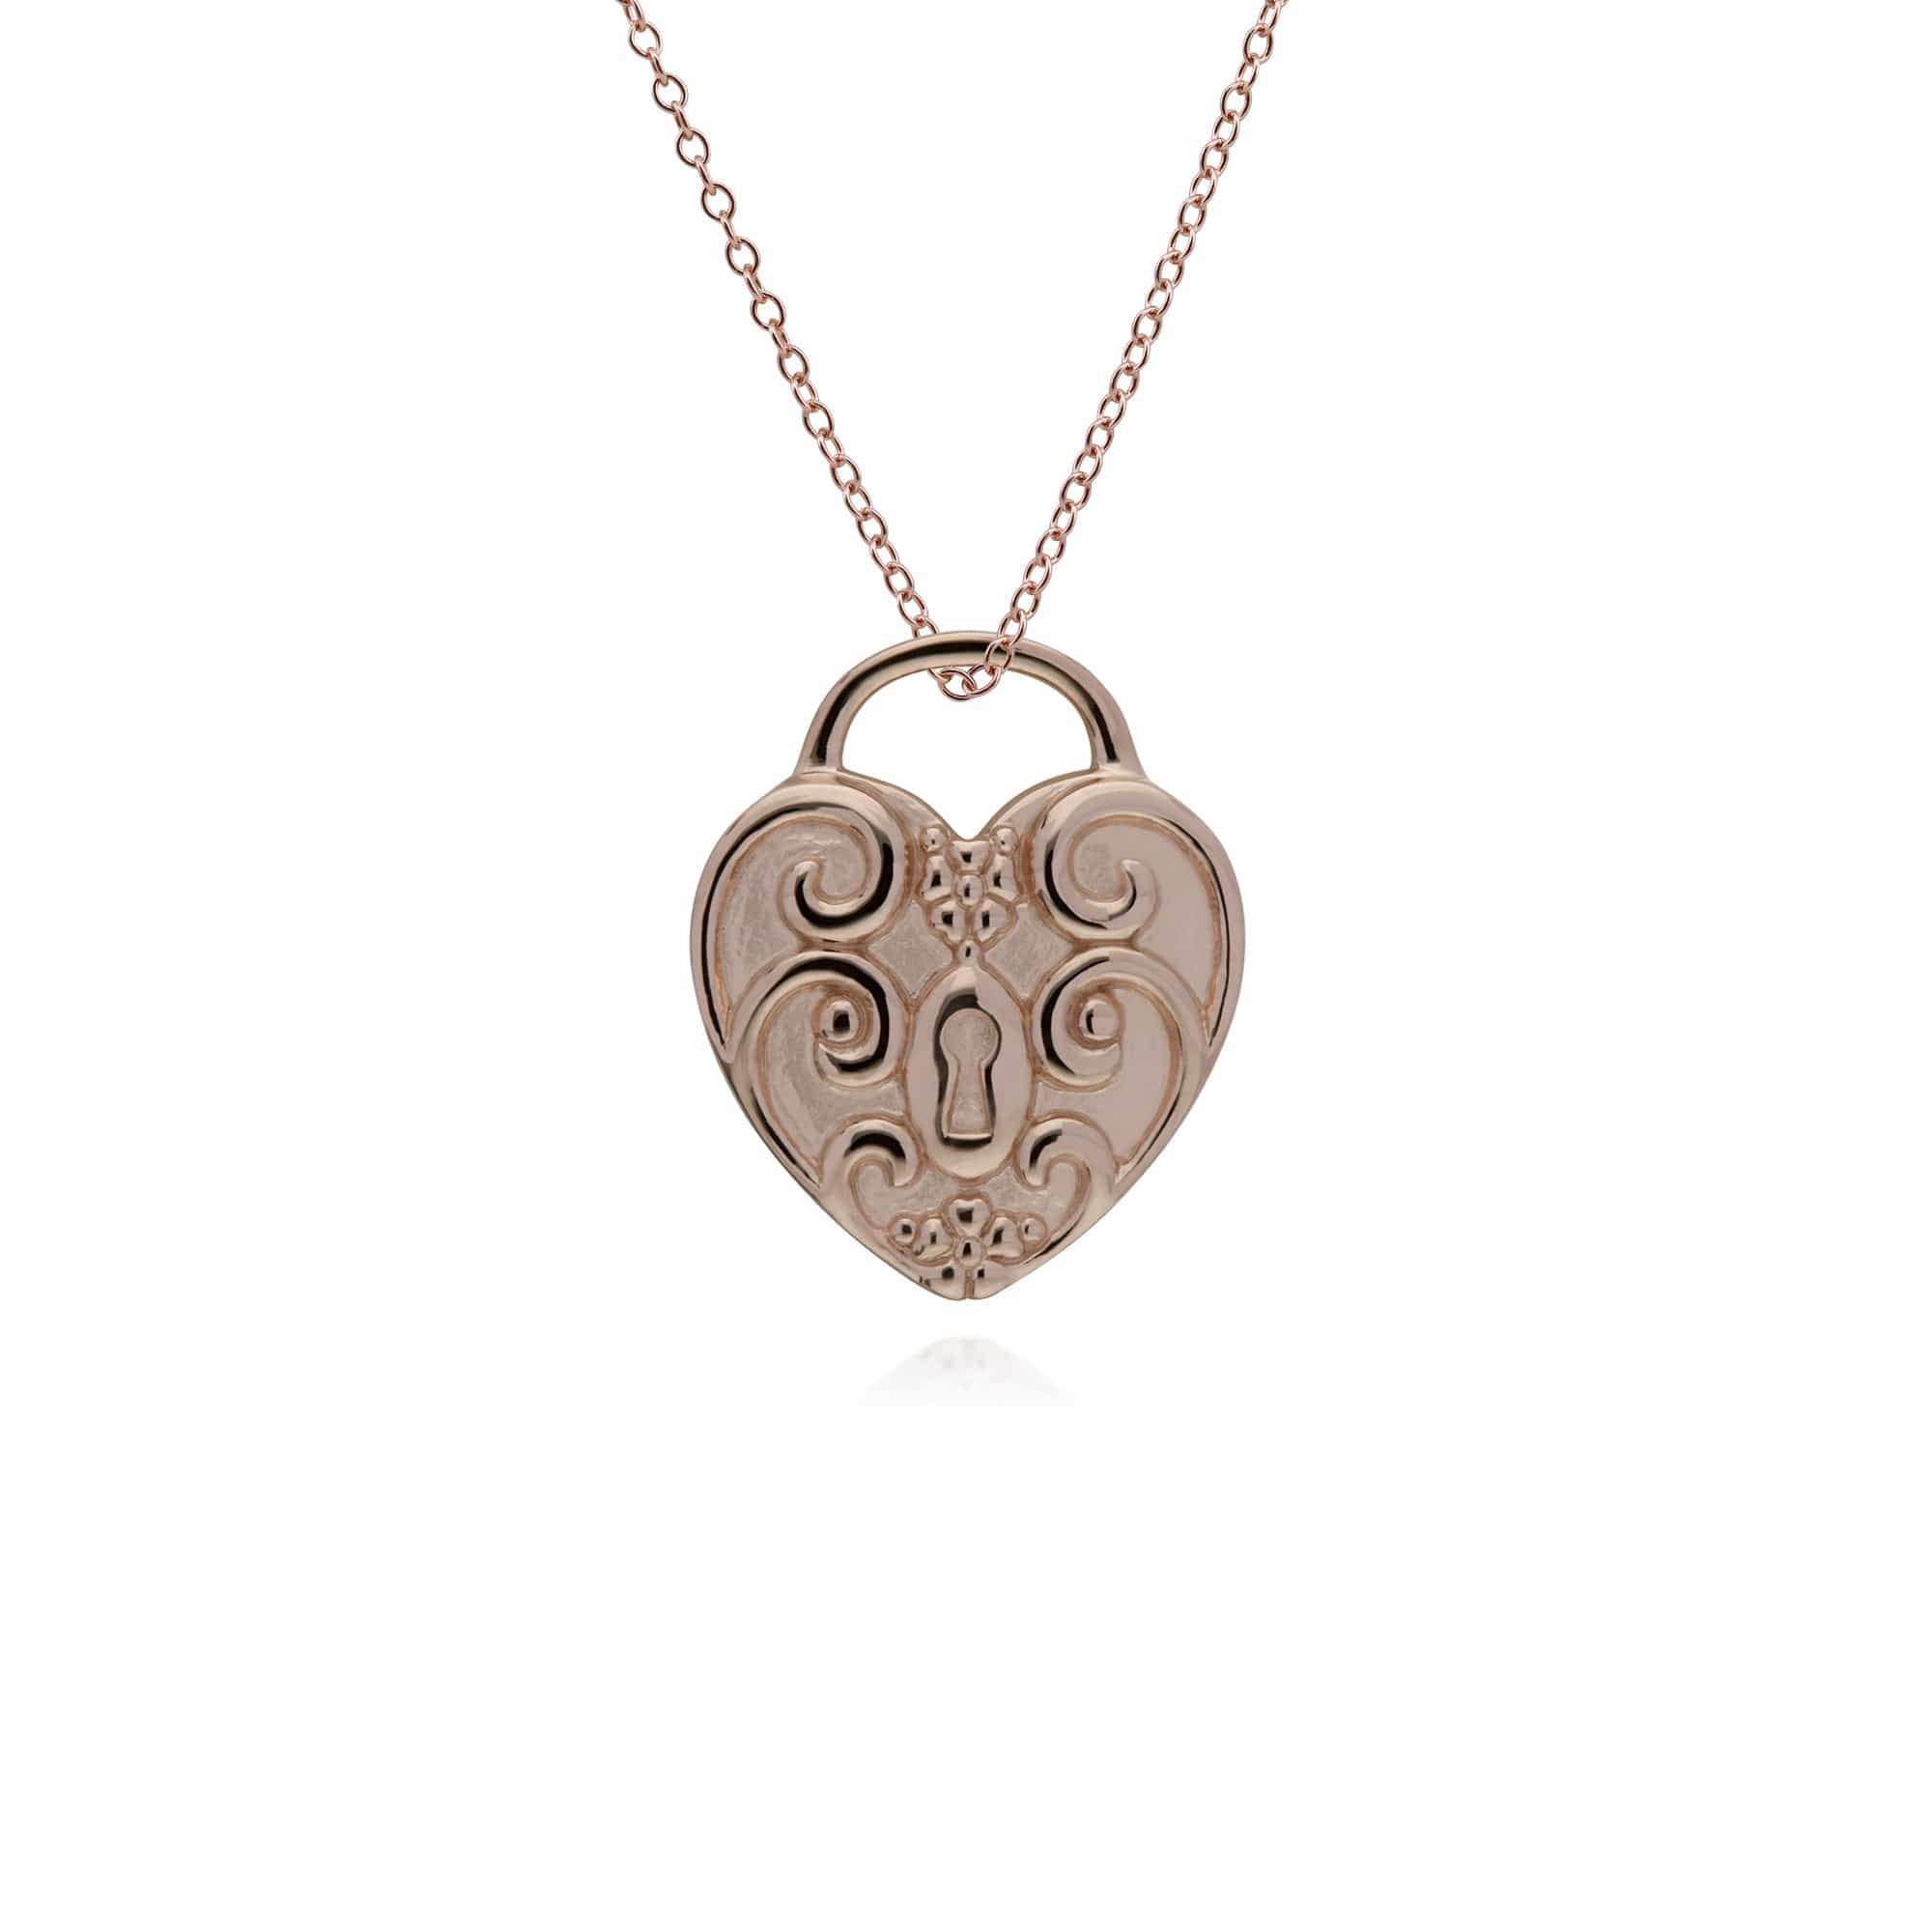 270P026303925-270P026501925 Classic Swirl Heart Lock Pendant & Emerald Key Charm in Rose Gold Plated 925 Sterling Silver 3